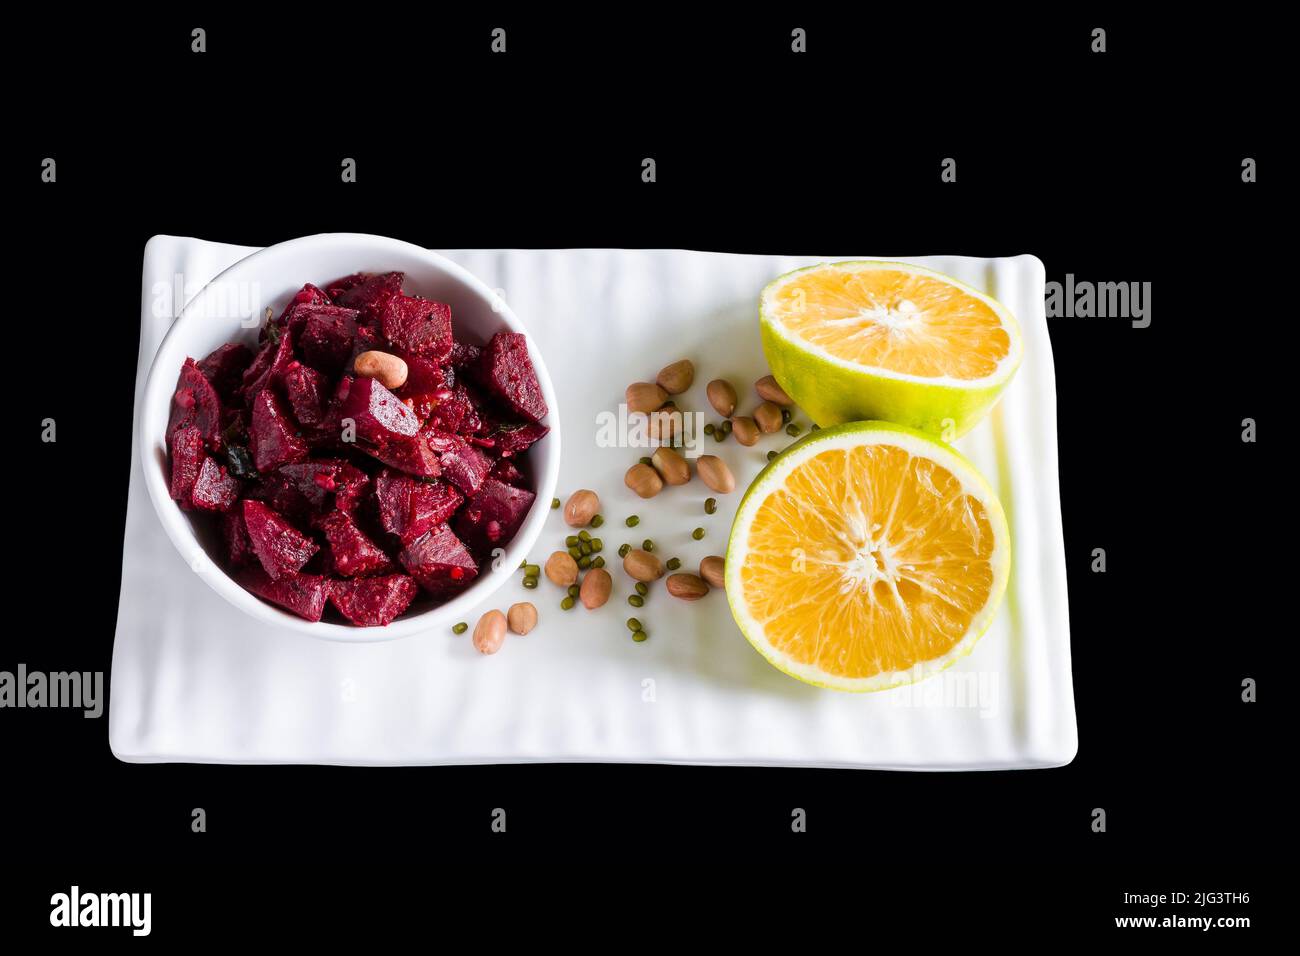 Stir-fried or sauteed Beetroot vegetable,garnished with peanuts,mint,sweet lime juice,half cut sweet lime fruit.Indian dish on black background. Stock Photo